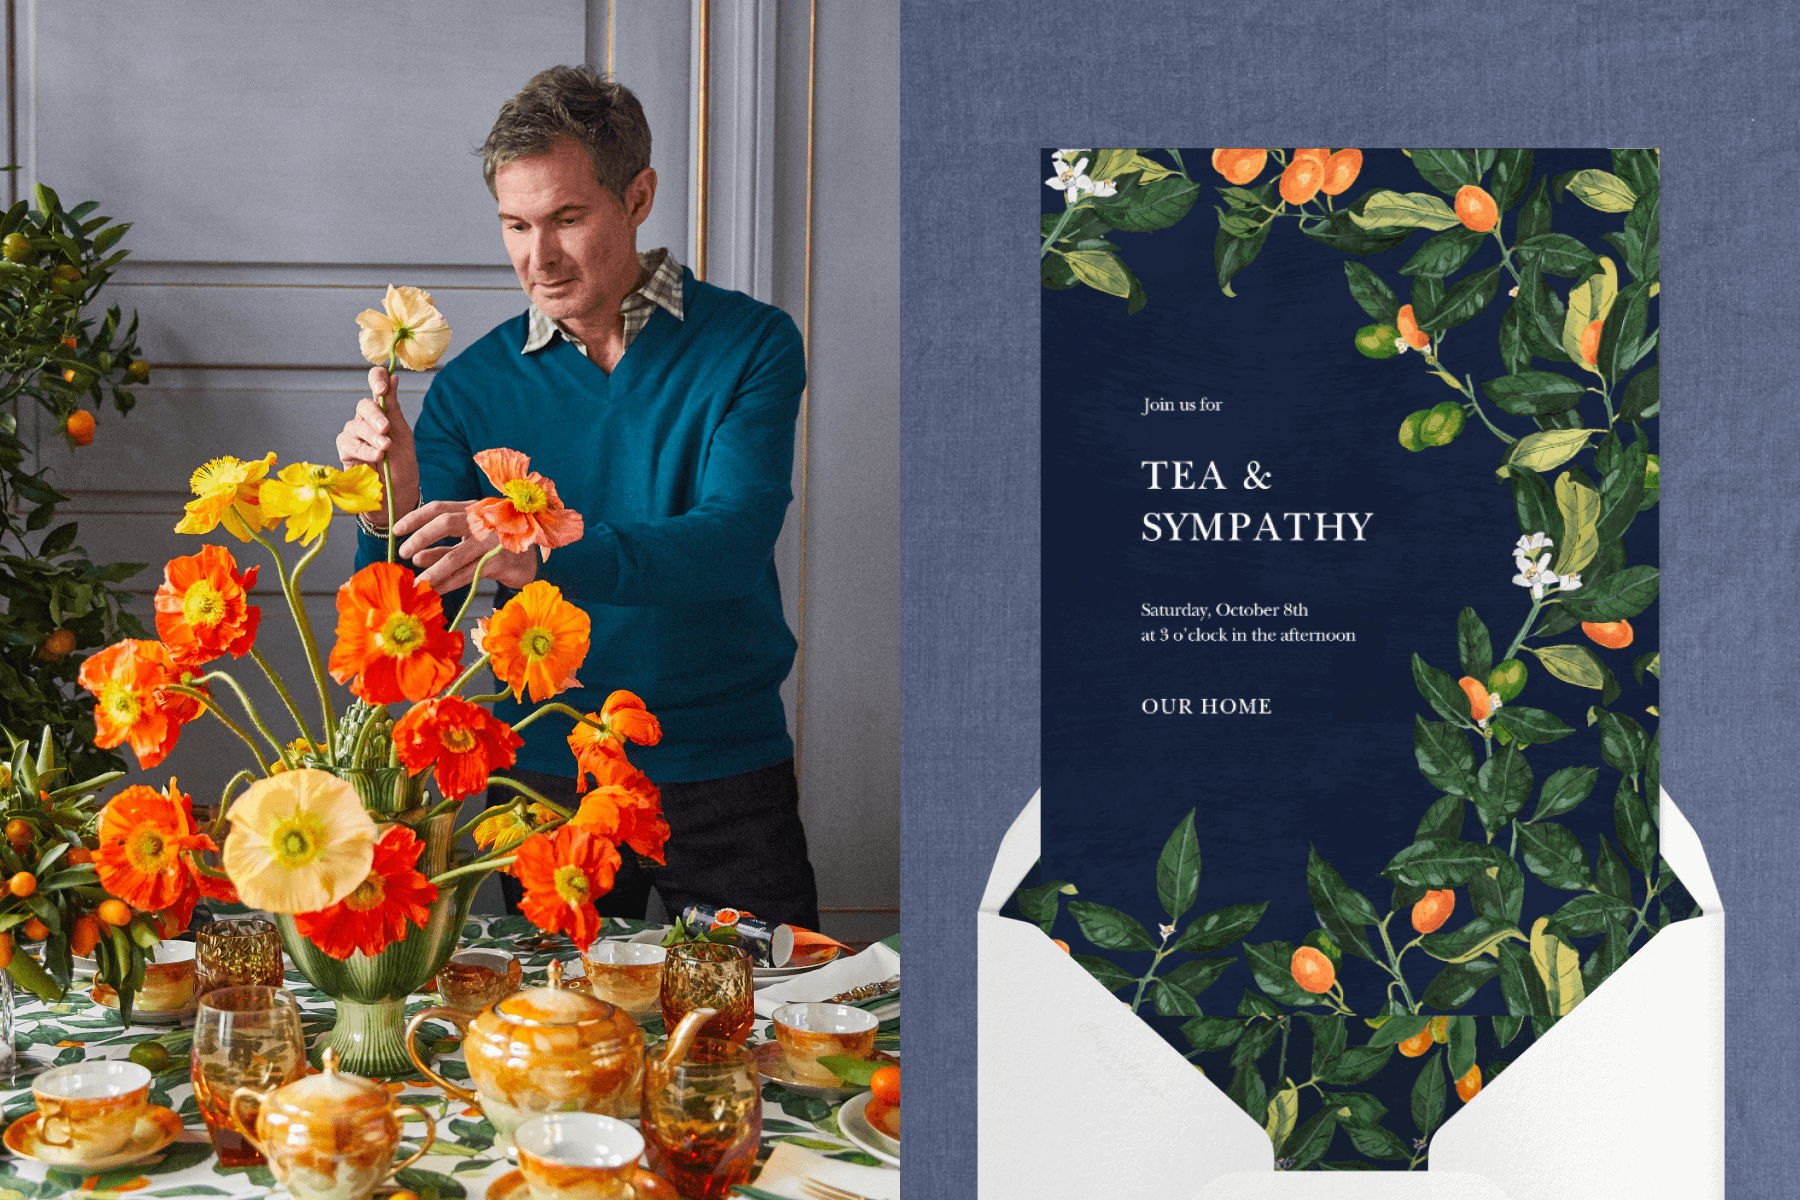 Left: Man, Bronson van Wyck, arranges orange and yellow flowers on a table set for afternoon tea. Right: A navy invitation for afternoon tea with kumquat fruit and leaves framing the border. 